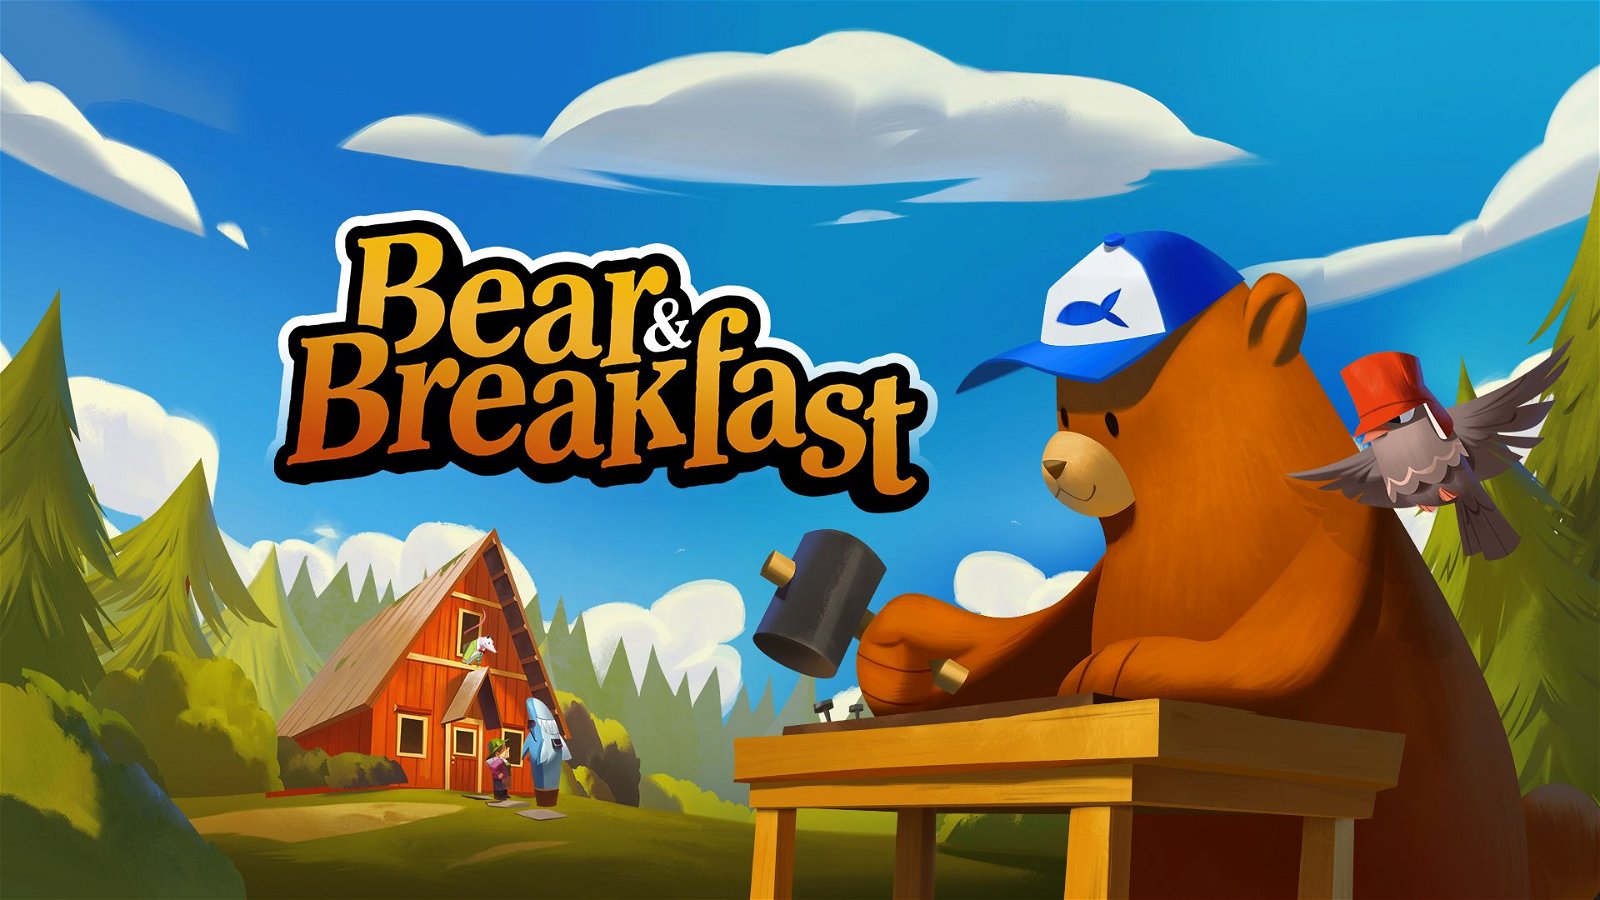 Image of Bear and Breakfast